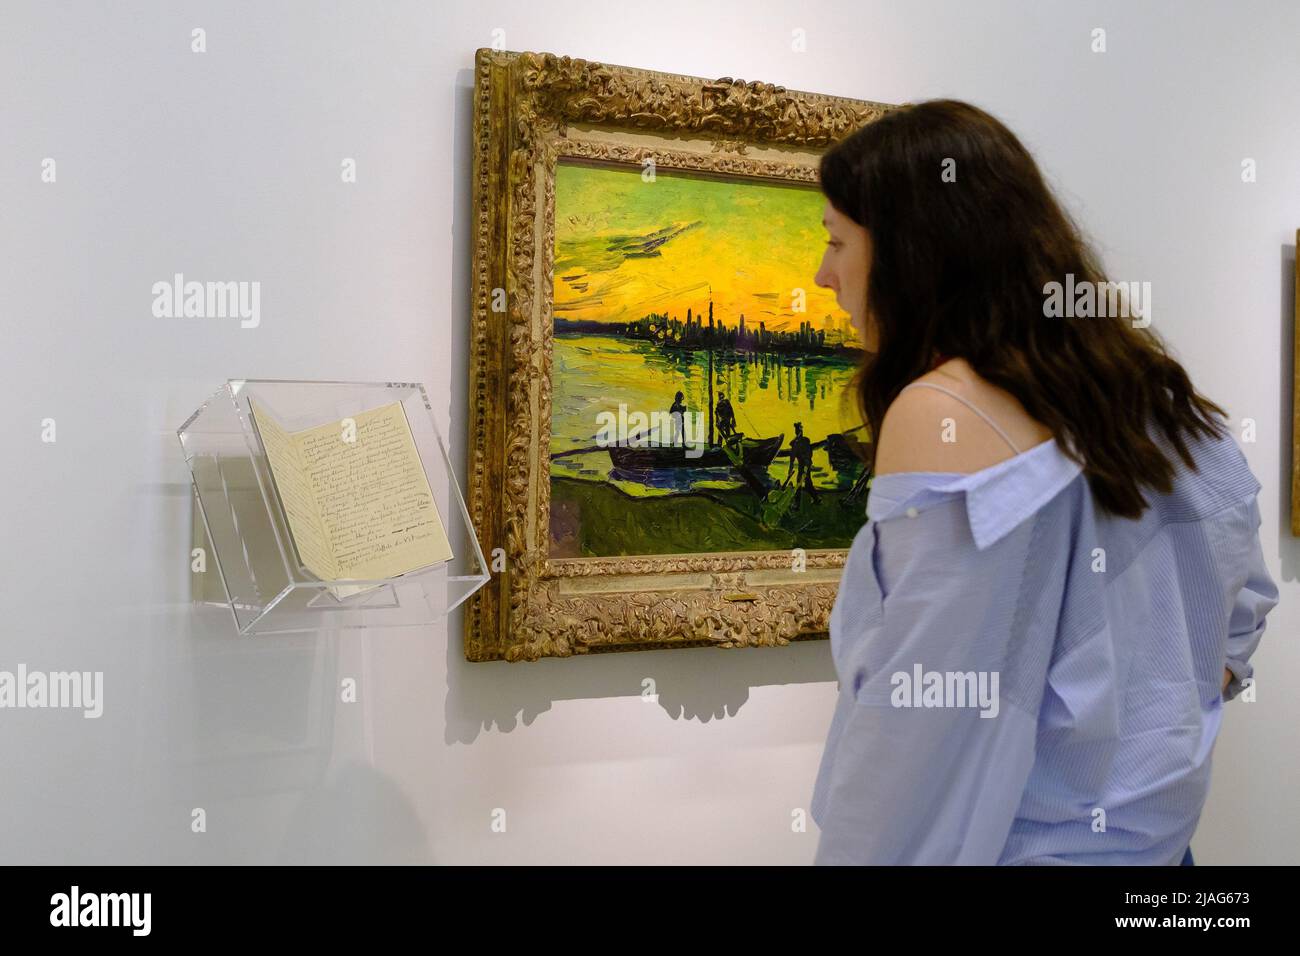 A woman looks at the painting Van Gogh during the exhibition "Artist  Letters in the Anne-Marie Springer Collection" at the Museo Nacional  Thyssen-Bornemisza in Madrid. The Thyssen-Bornemisza National Museum  presents, for the first time in Spain, a ...